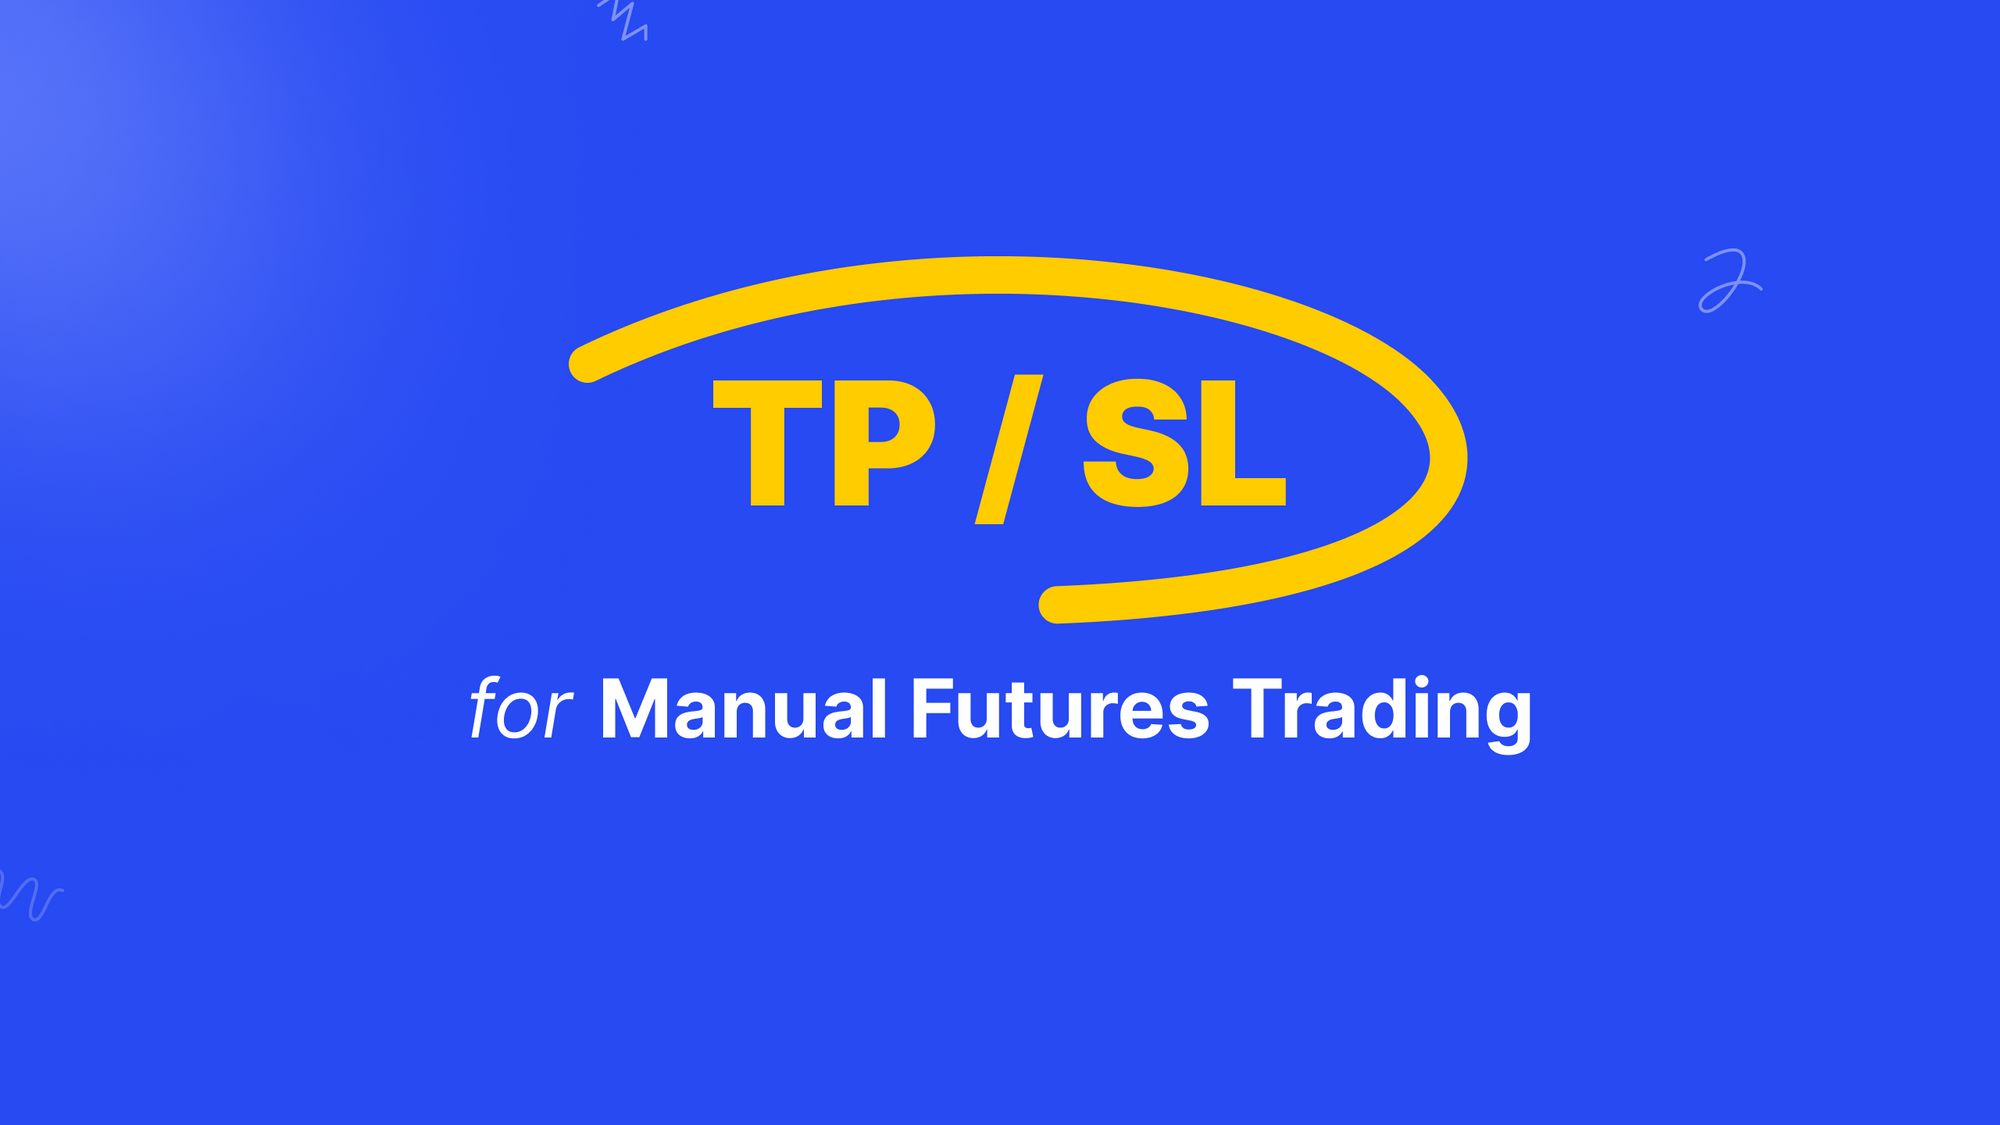 Feature Release: Take Profit / Stop Loss Orders for Futures Manual Trading